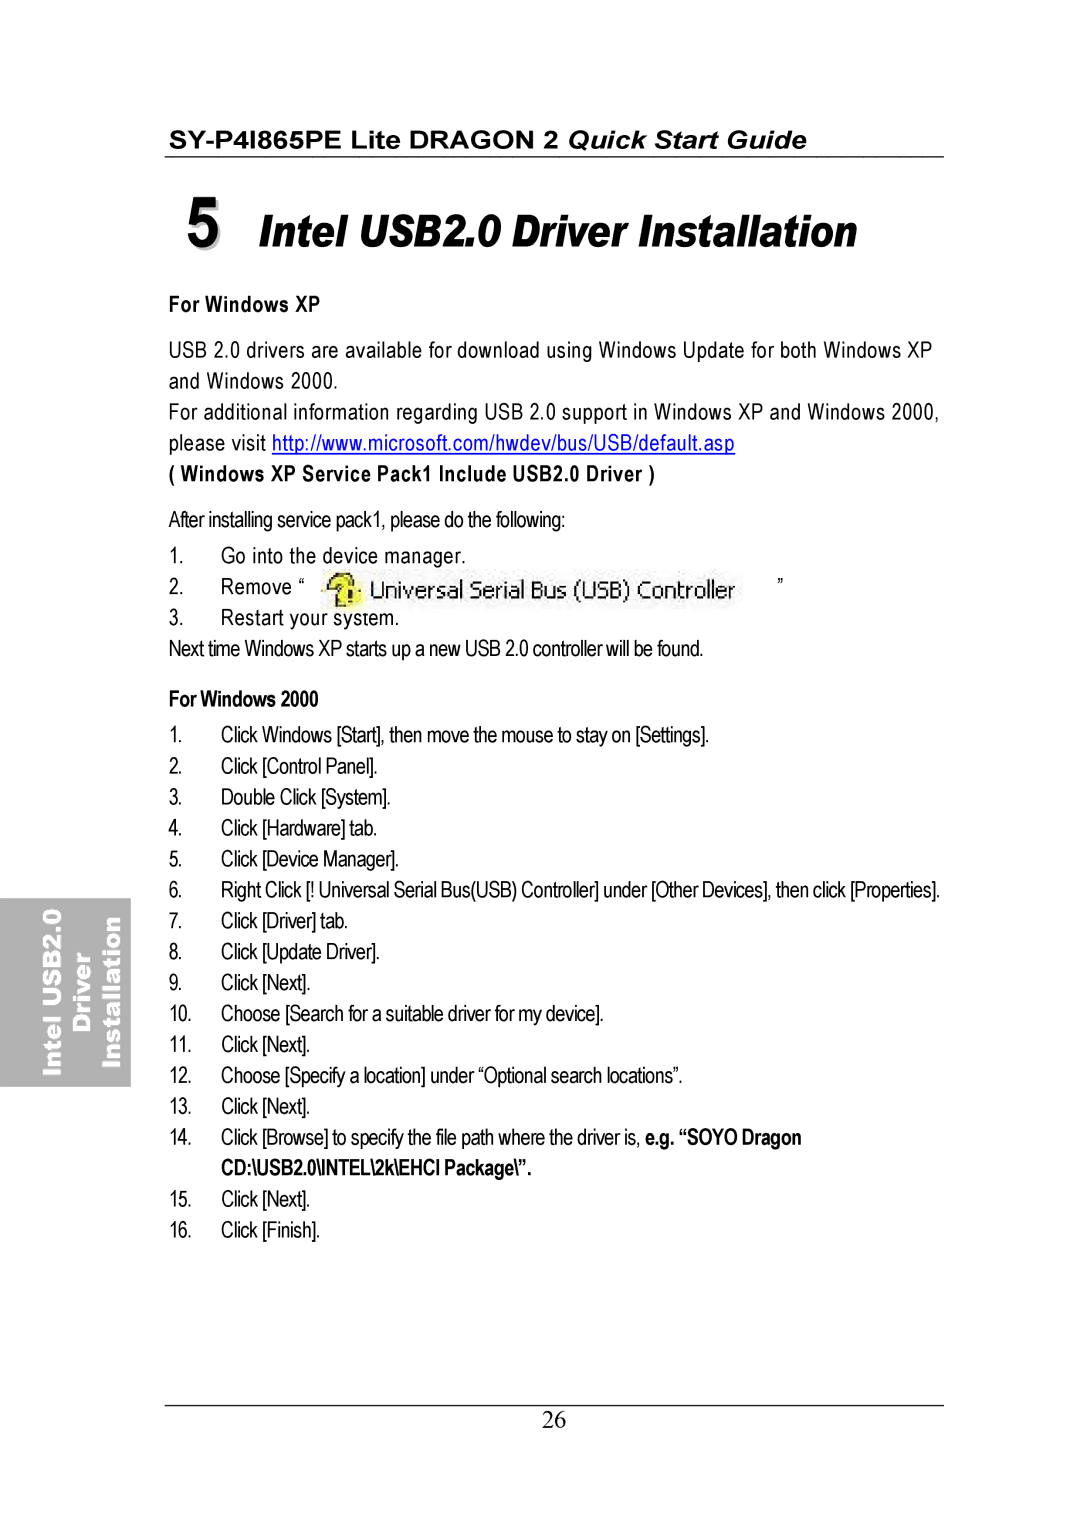 Olicom quick start For Windows XP, Windows XP Service Pack1 Include USB2.0 Driver, CD\USB2.0\INTEL\2k\EHCI Package 